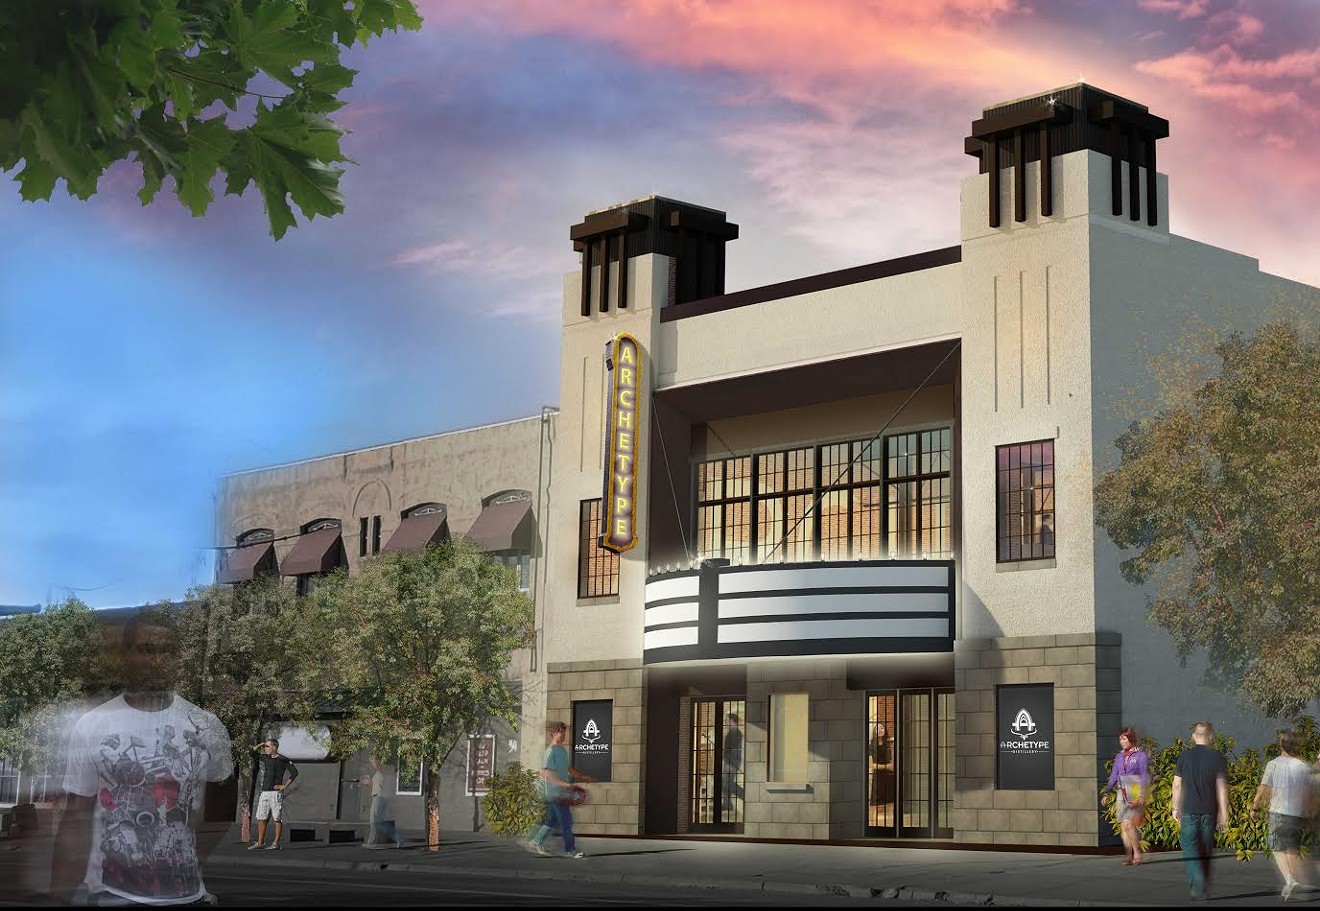 A former theater will soon become a distillery.